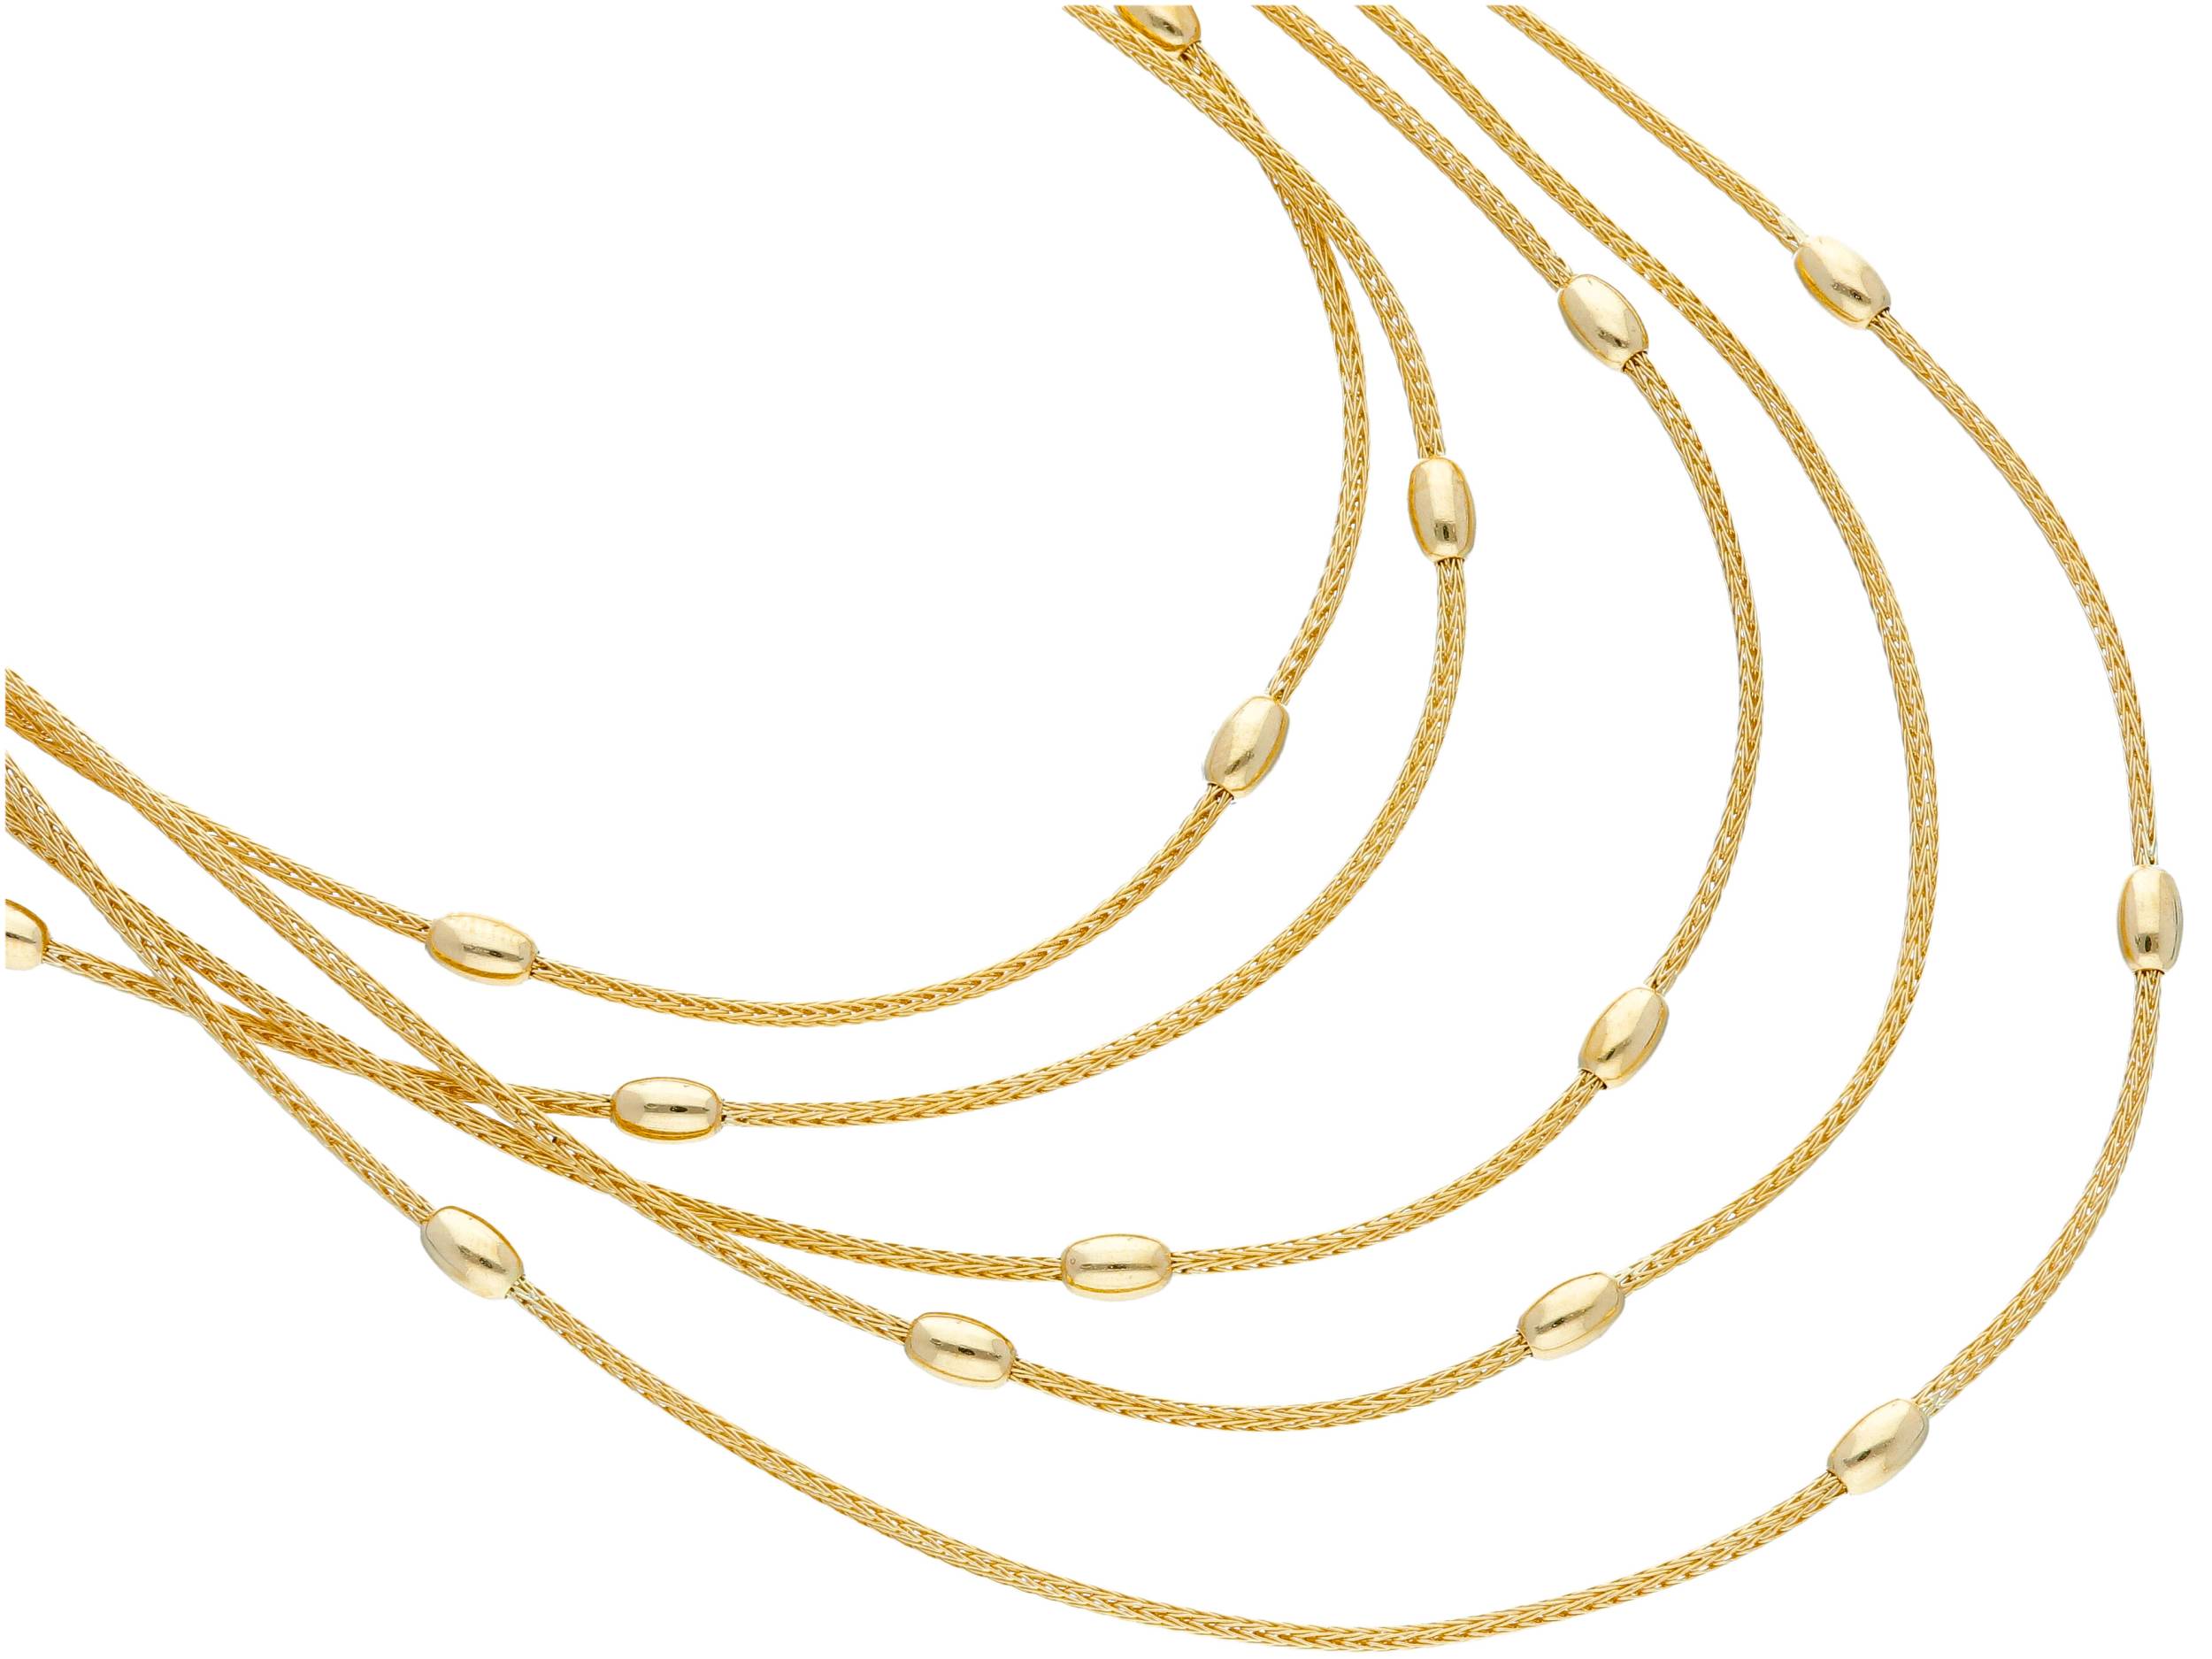 Beautiful 18ct Yellow Gold Flexible Necklace